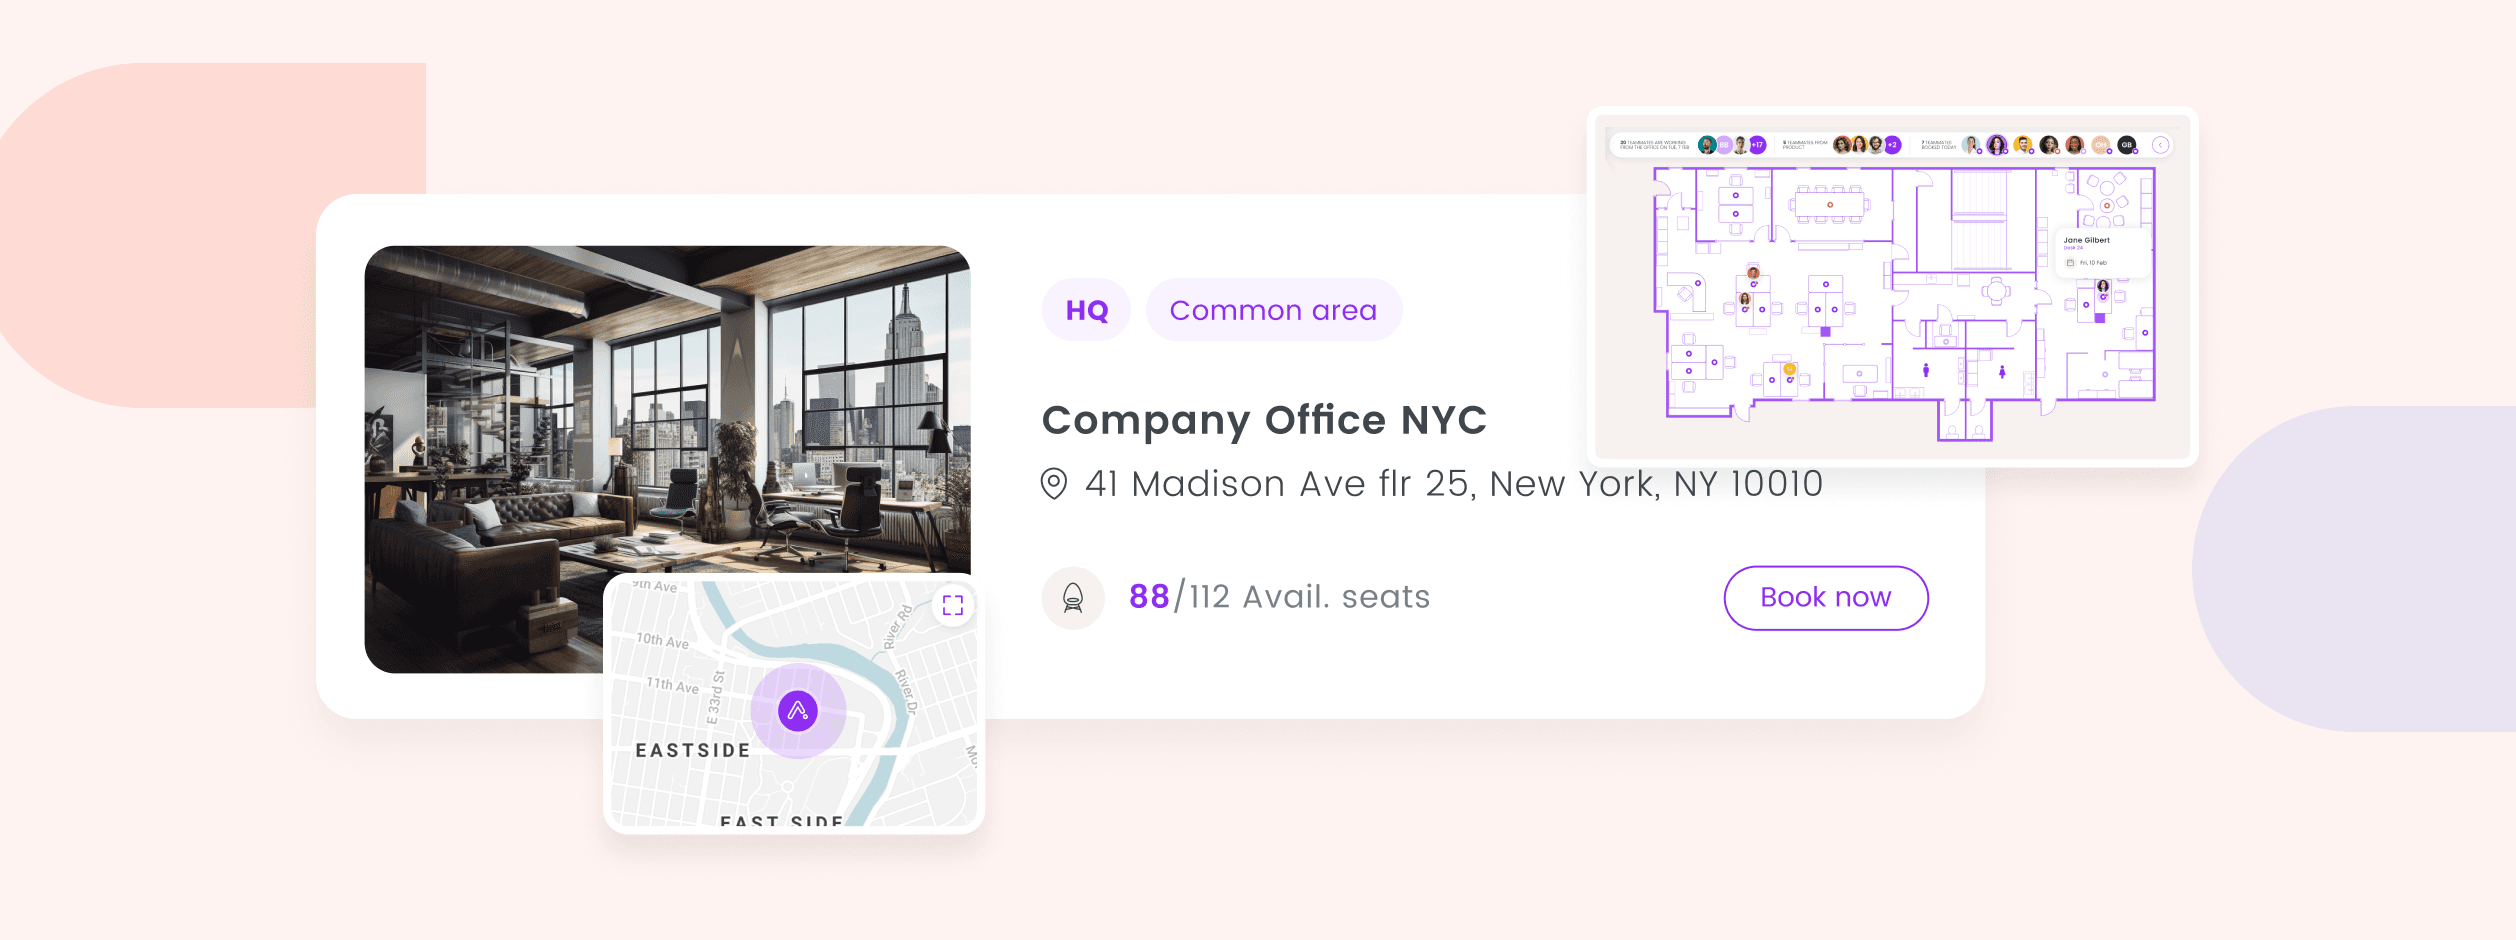 Introducing Gable HQ: A Seamless Way To Manage Your Entire Workplace Strategy